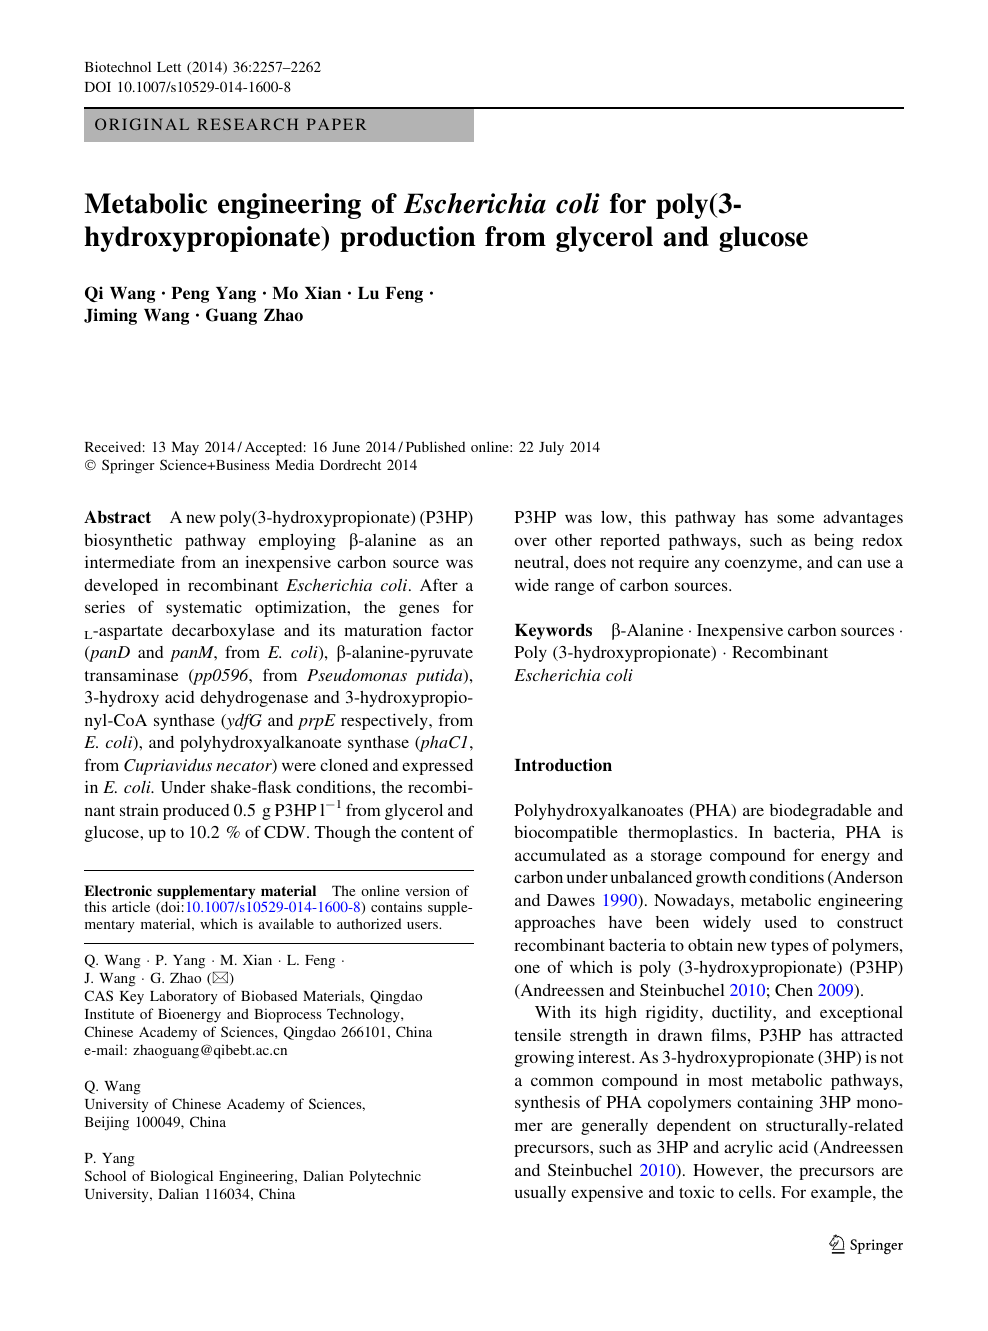 Metabolic Engineering Of Escherichia Coli For Poly 3 Hydroxypropionate Production From Glycerol And Glucose Topic Of Research Paper In Industrial Biotechnology Download Scholarly Article Pdf And Read For Free On Cyberleninka Open Science